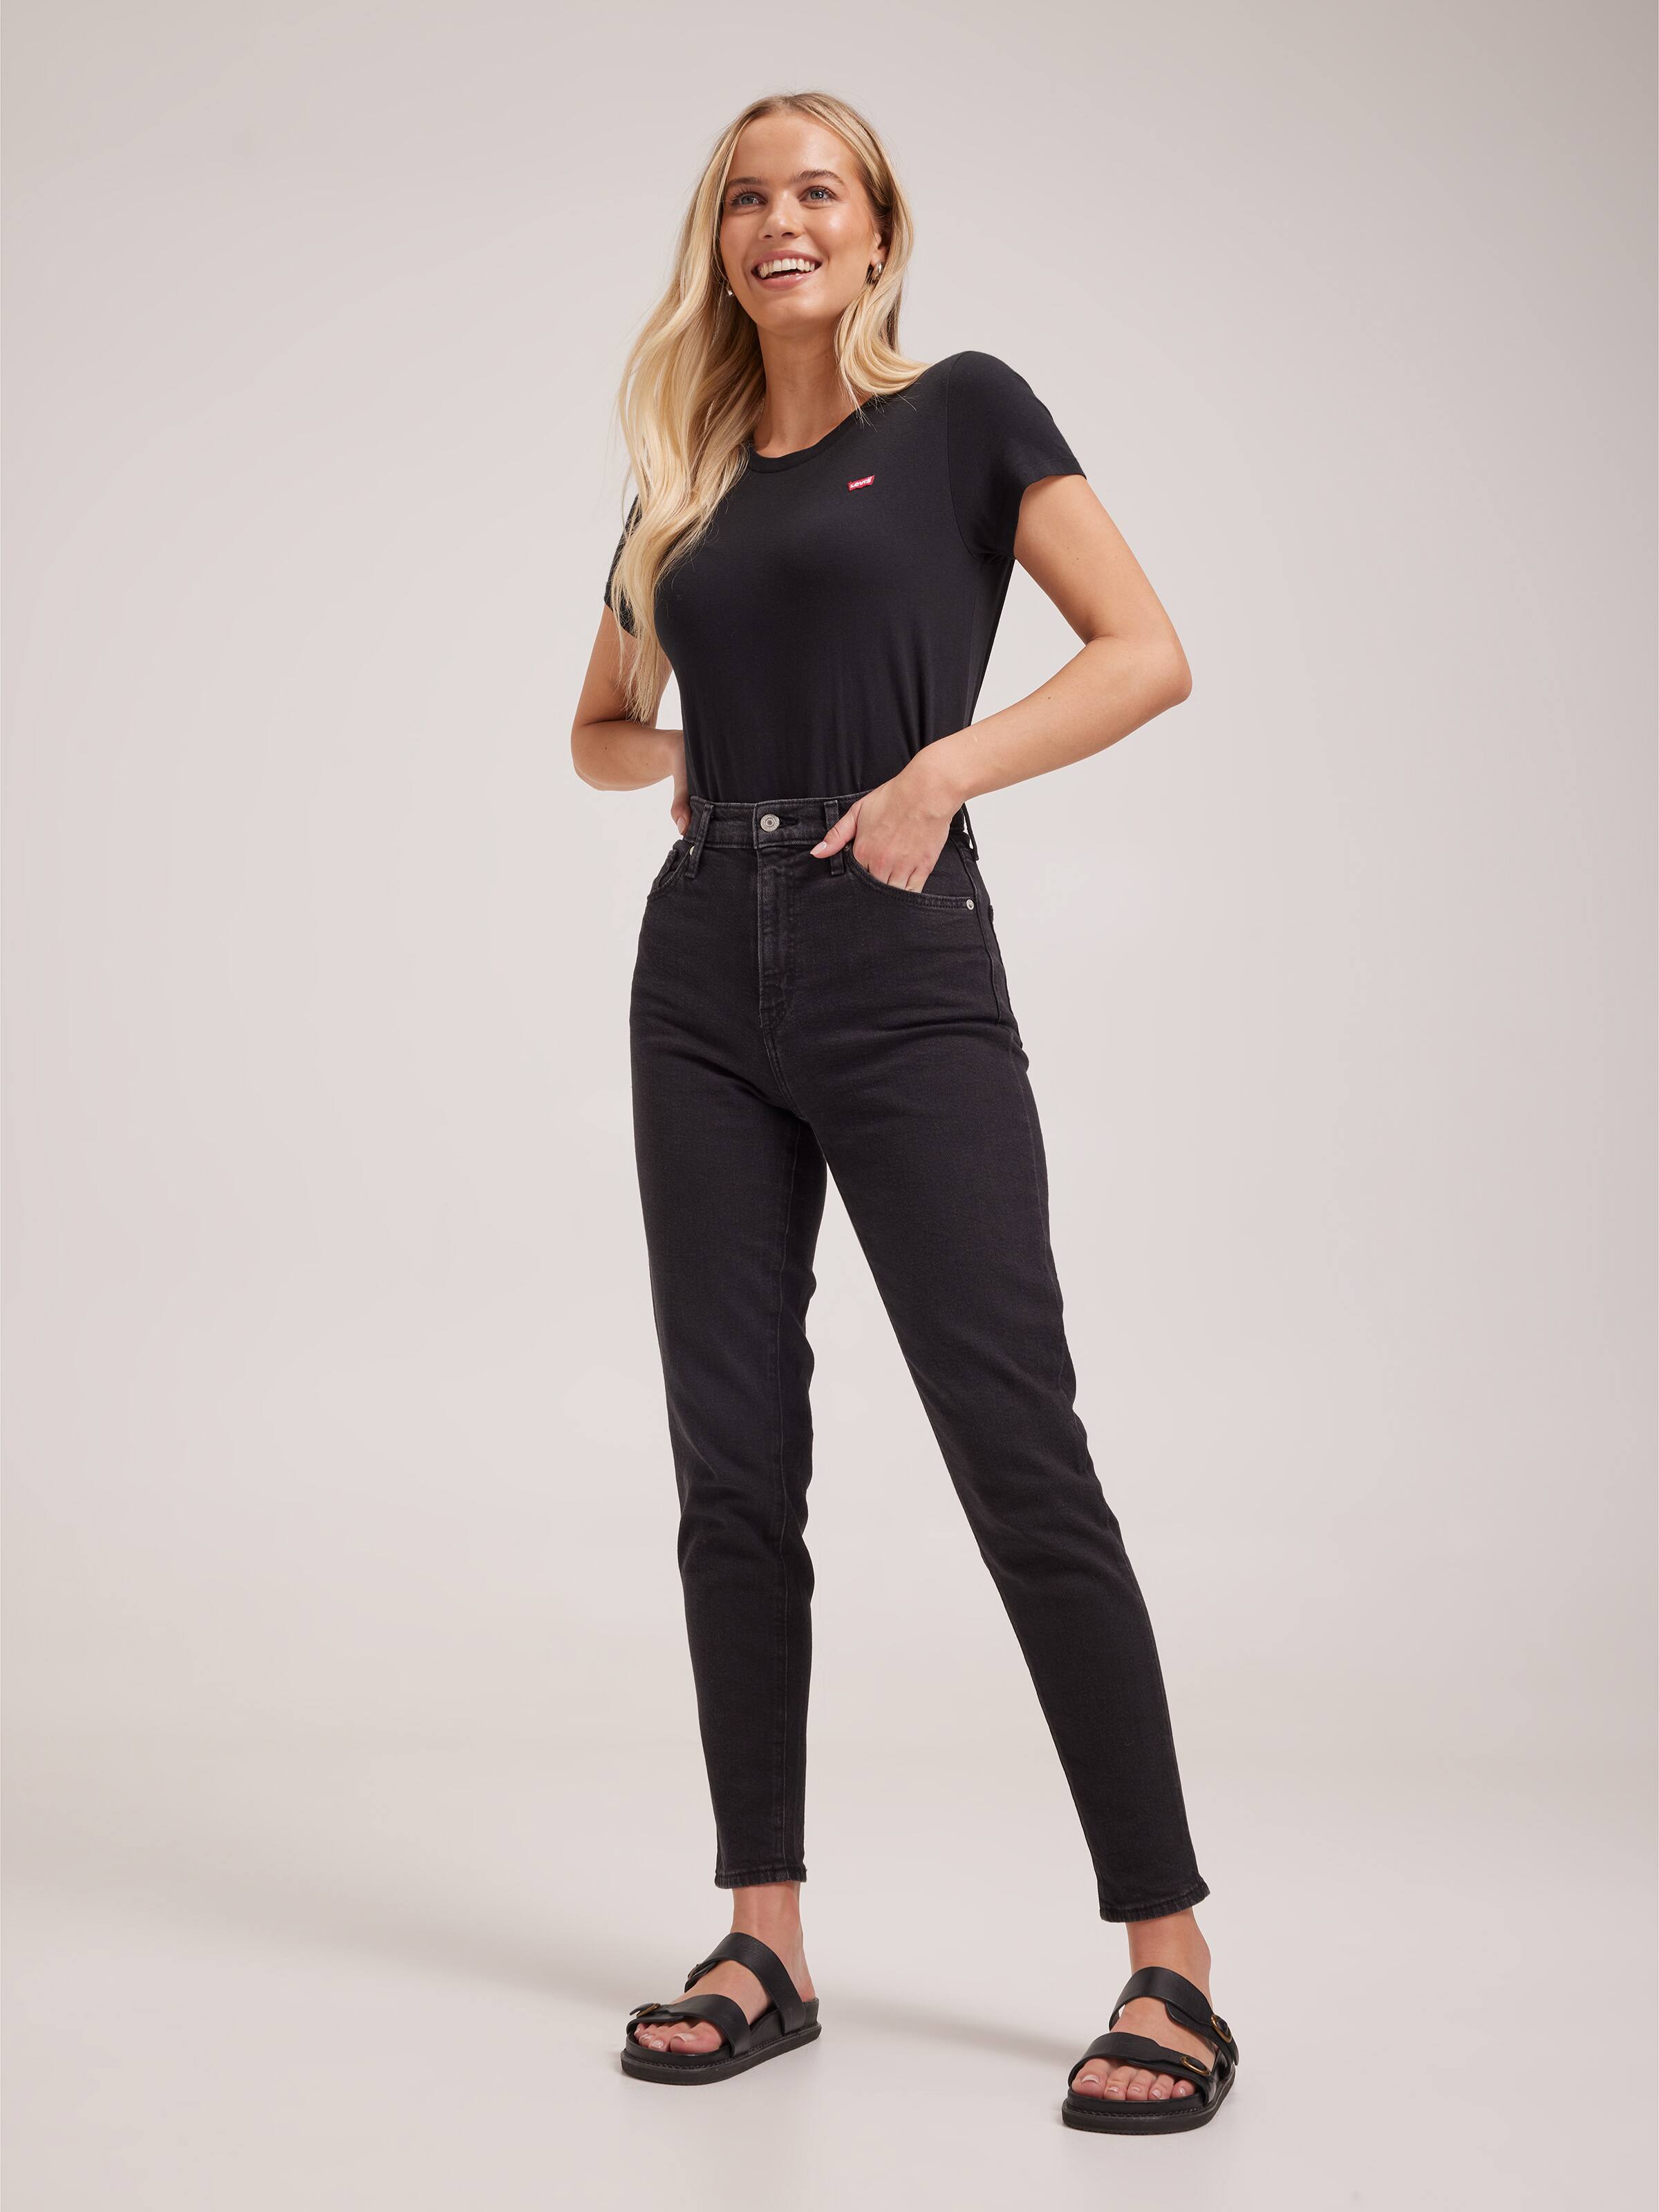 Women's Jeans By Levi's | Just Jeans